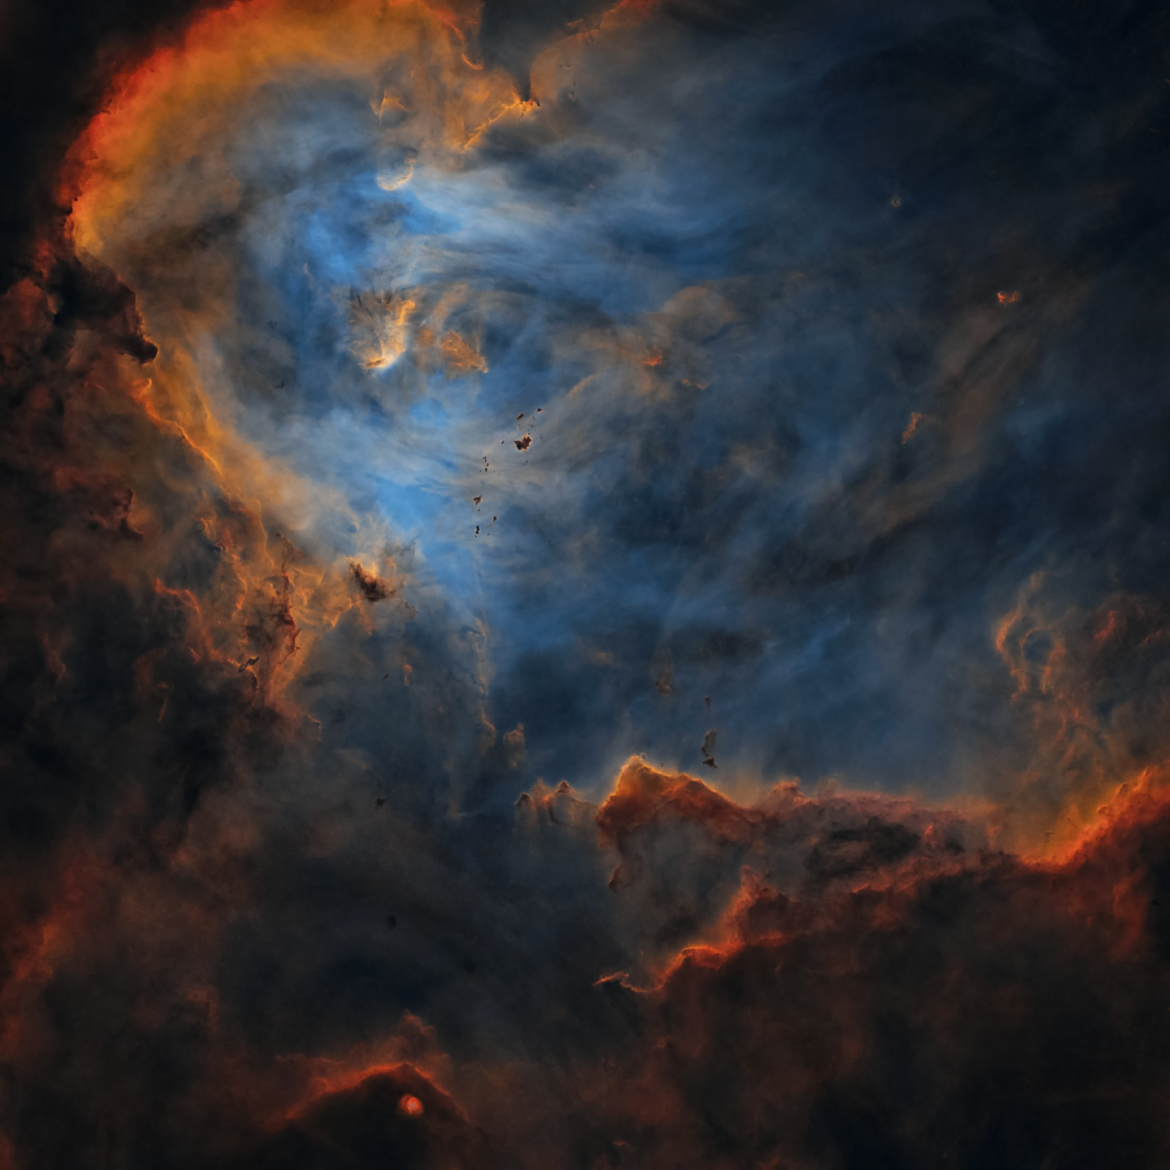 fot. Bogdan Borz, "Clouds in IC 2944", 2. miejsce w kat. Start and Nebulae<br></br><br></br>